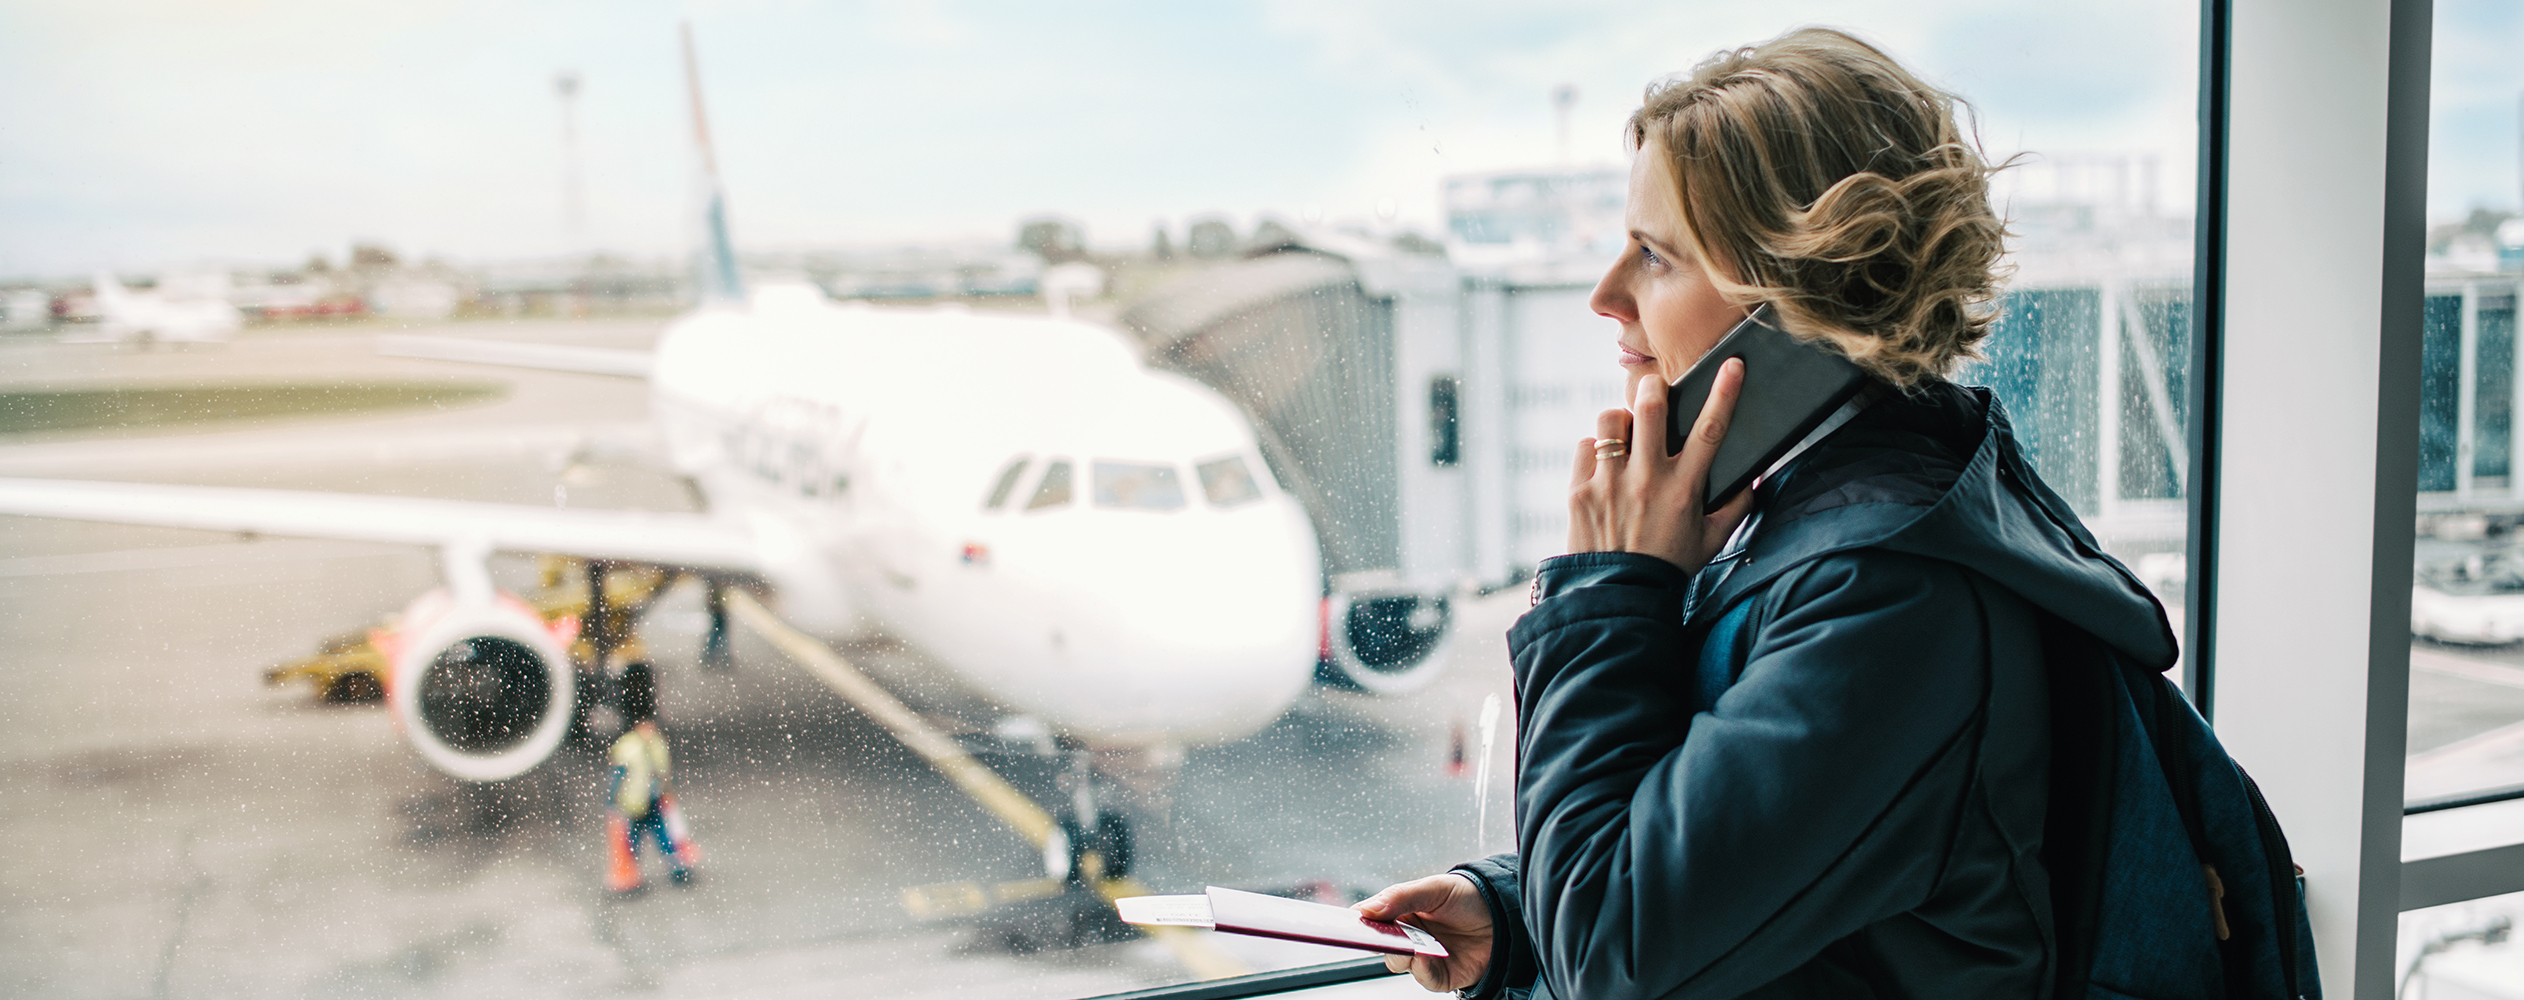 New Airline Change & Cancellation Rules Amidst COVID - NerdWallet